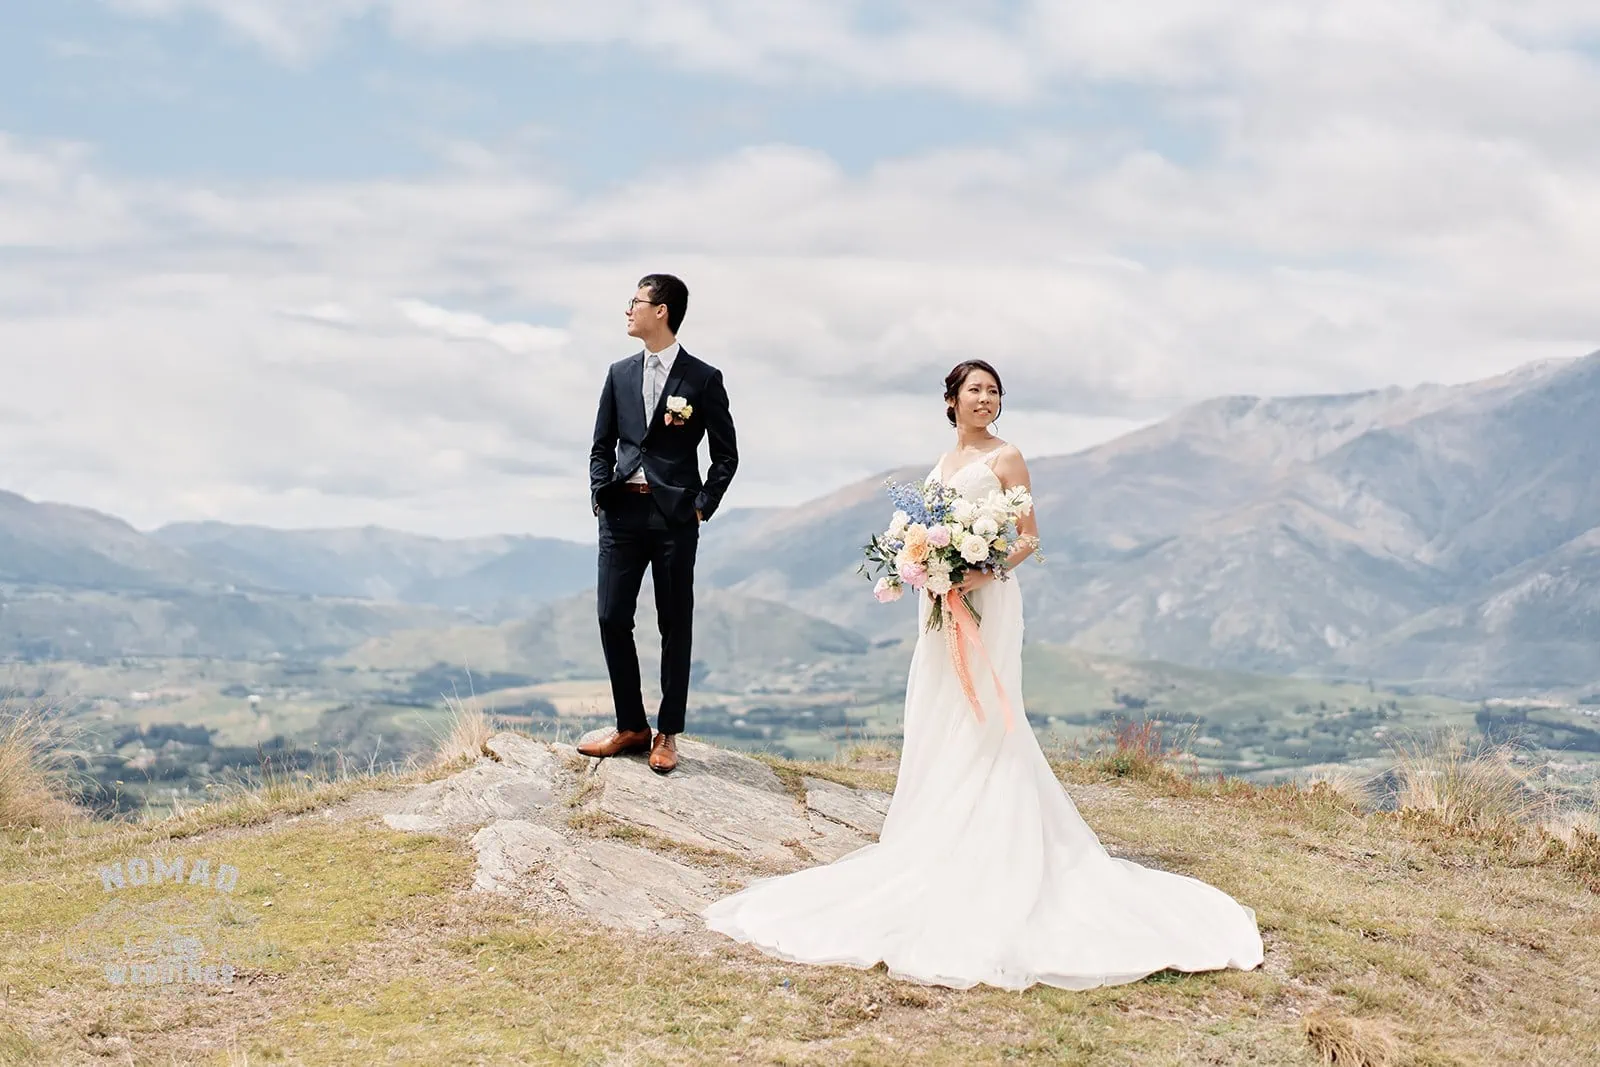 Queenstown New Zealand Elopement Wedding Photographer - A couple standing on top of a hill with mountains in the background.